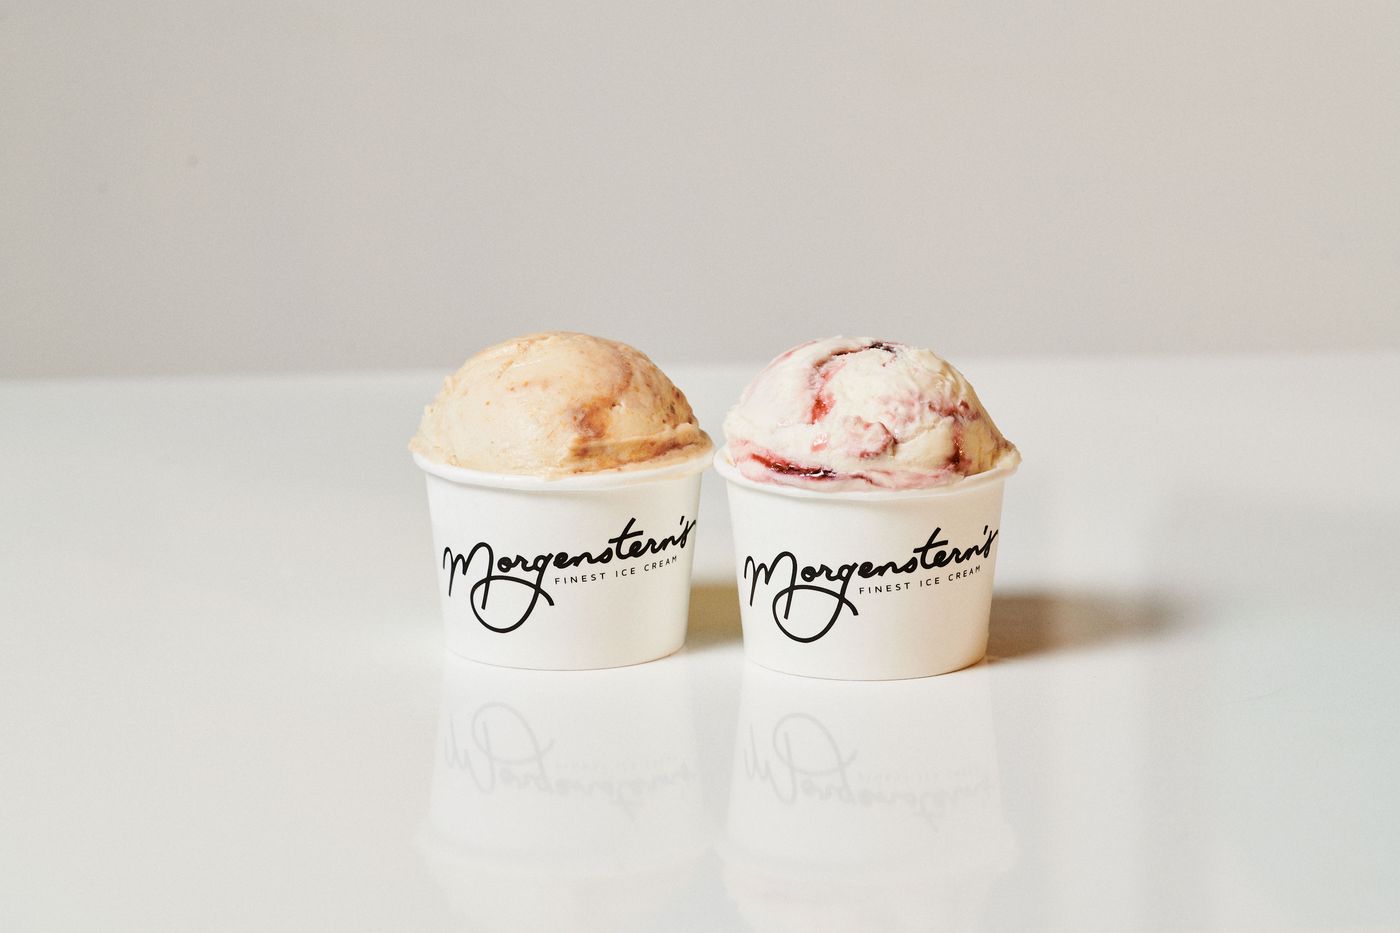 ▷ ice cream designed by Morgenstern's Finest Ice Cream 🍦 Stop by